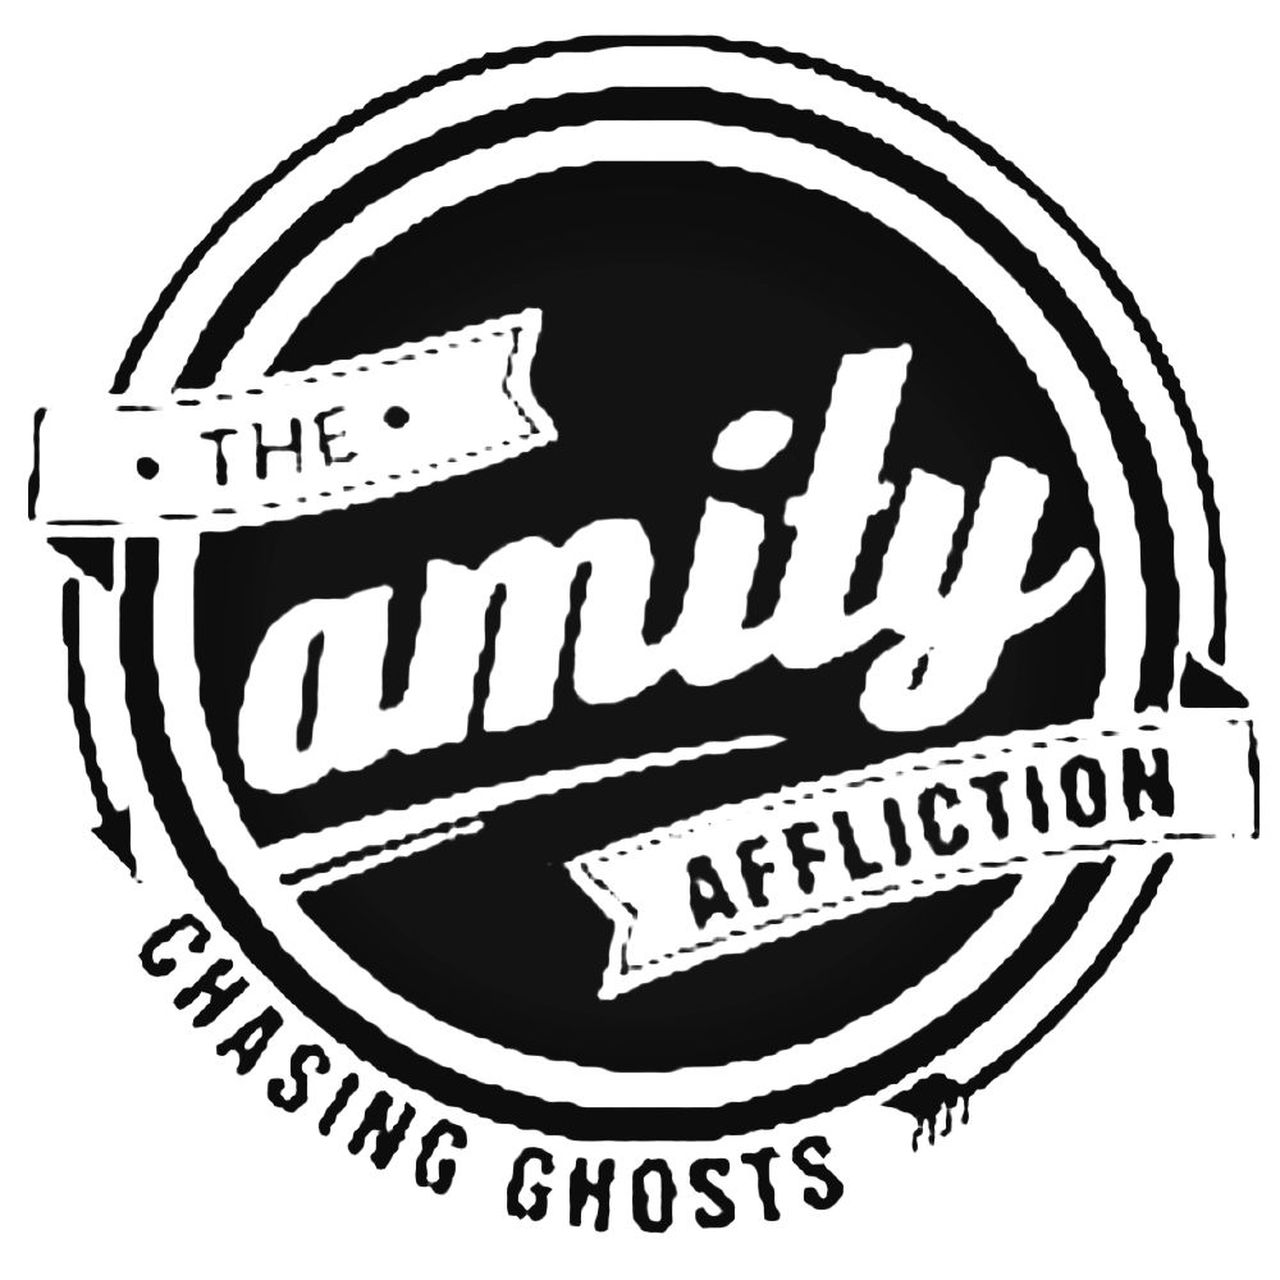 The Amity Affliction Taa Band Decal Sticker.